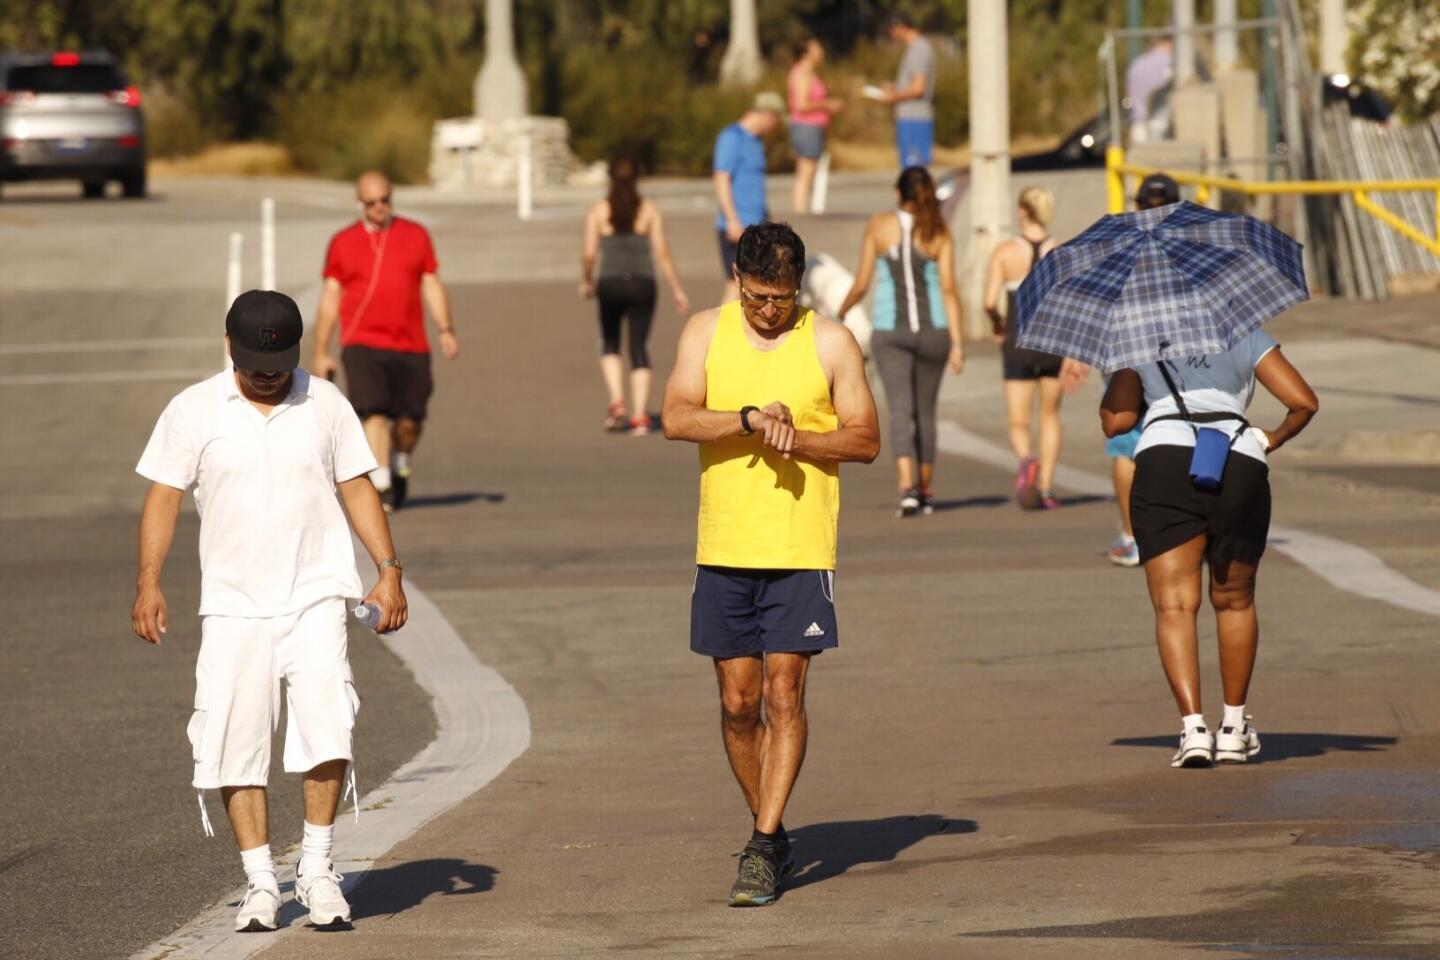 The exercise area around the Rose Bowl in Pasadena was busy early Monday morning,